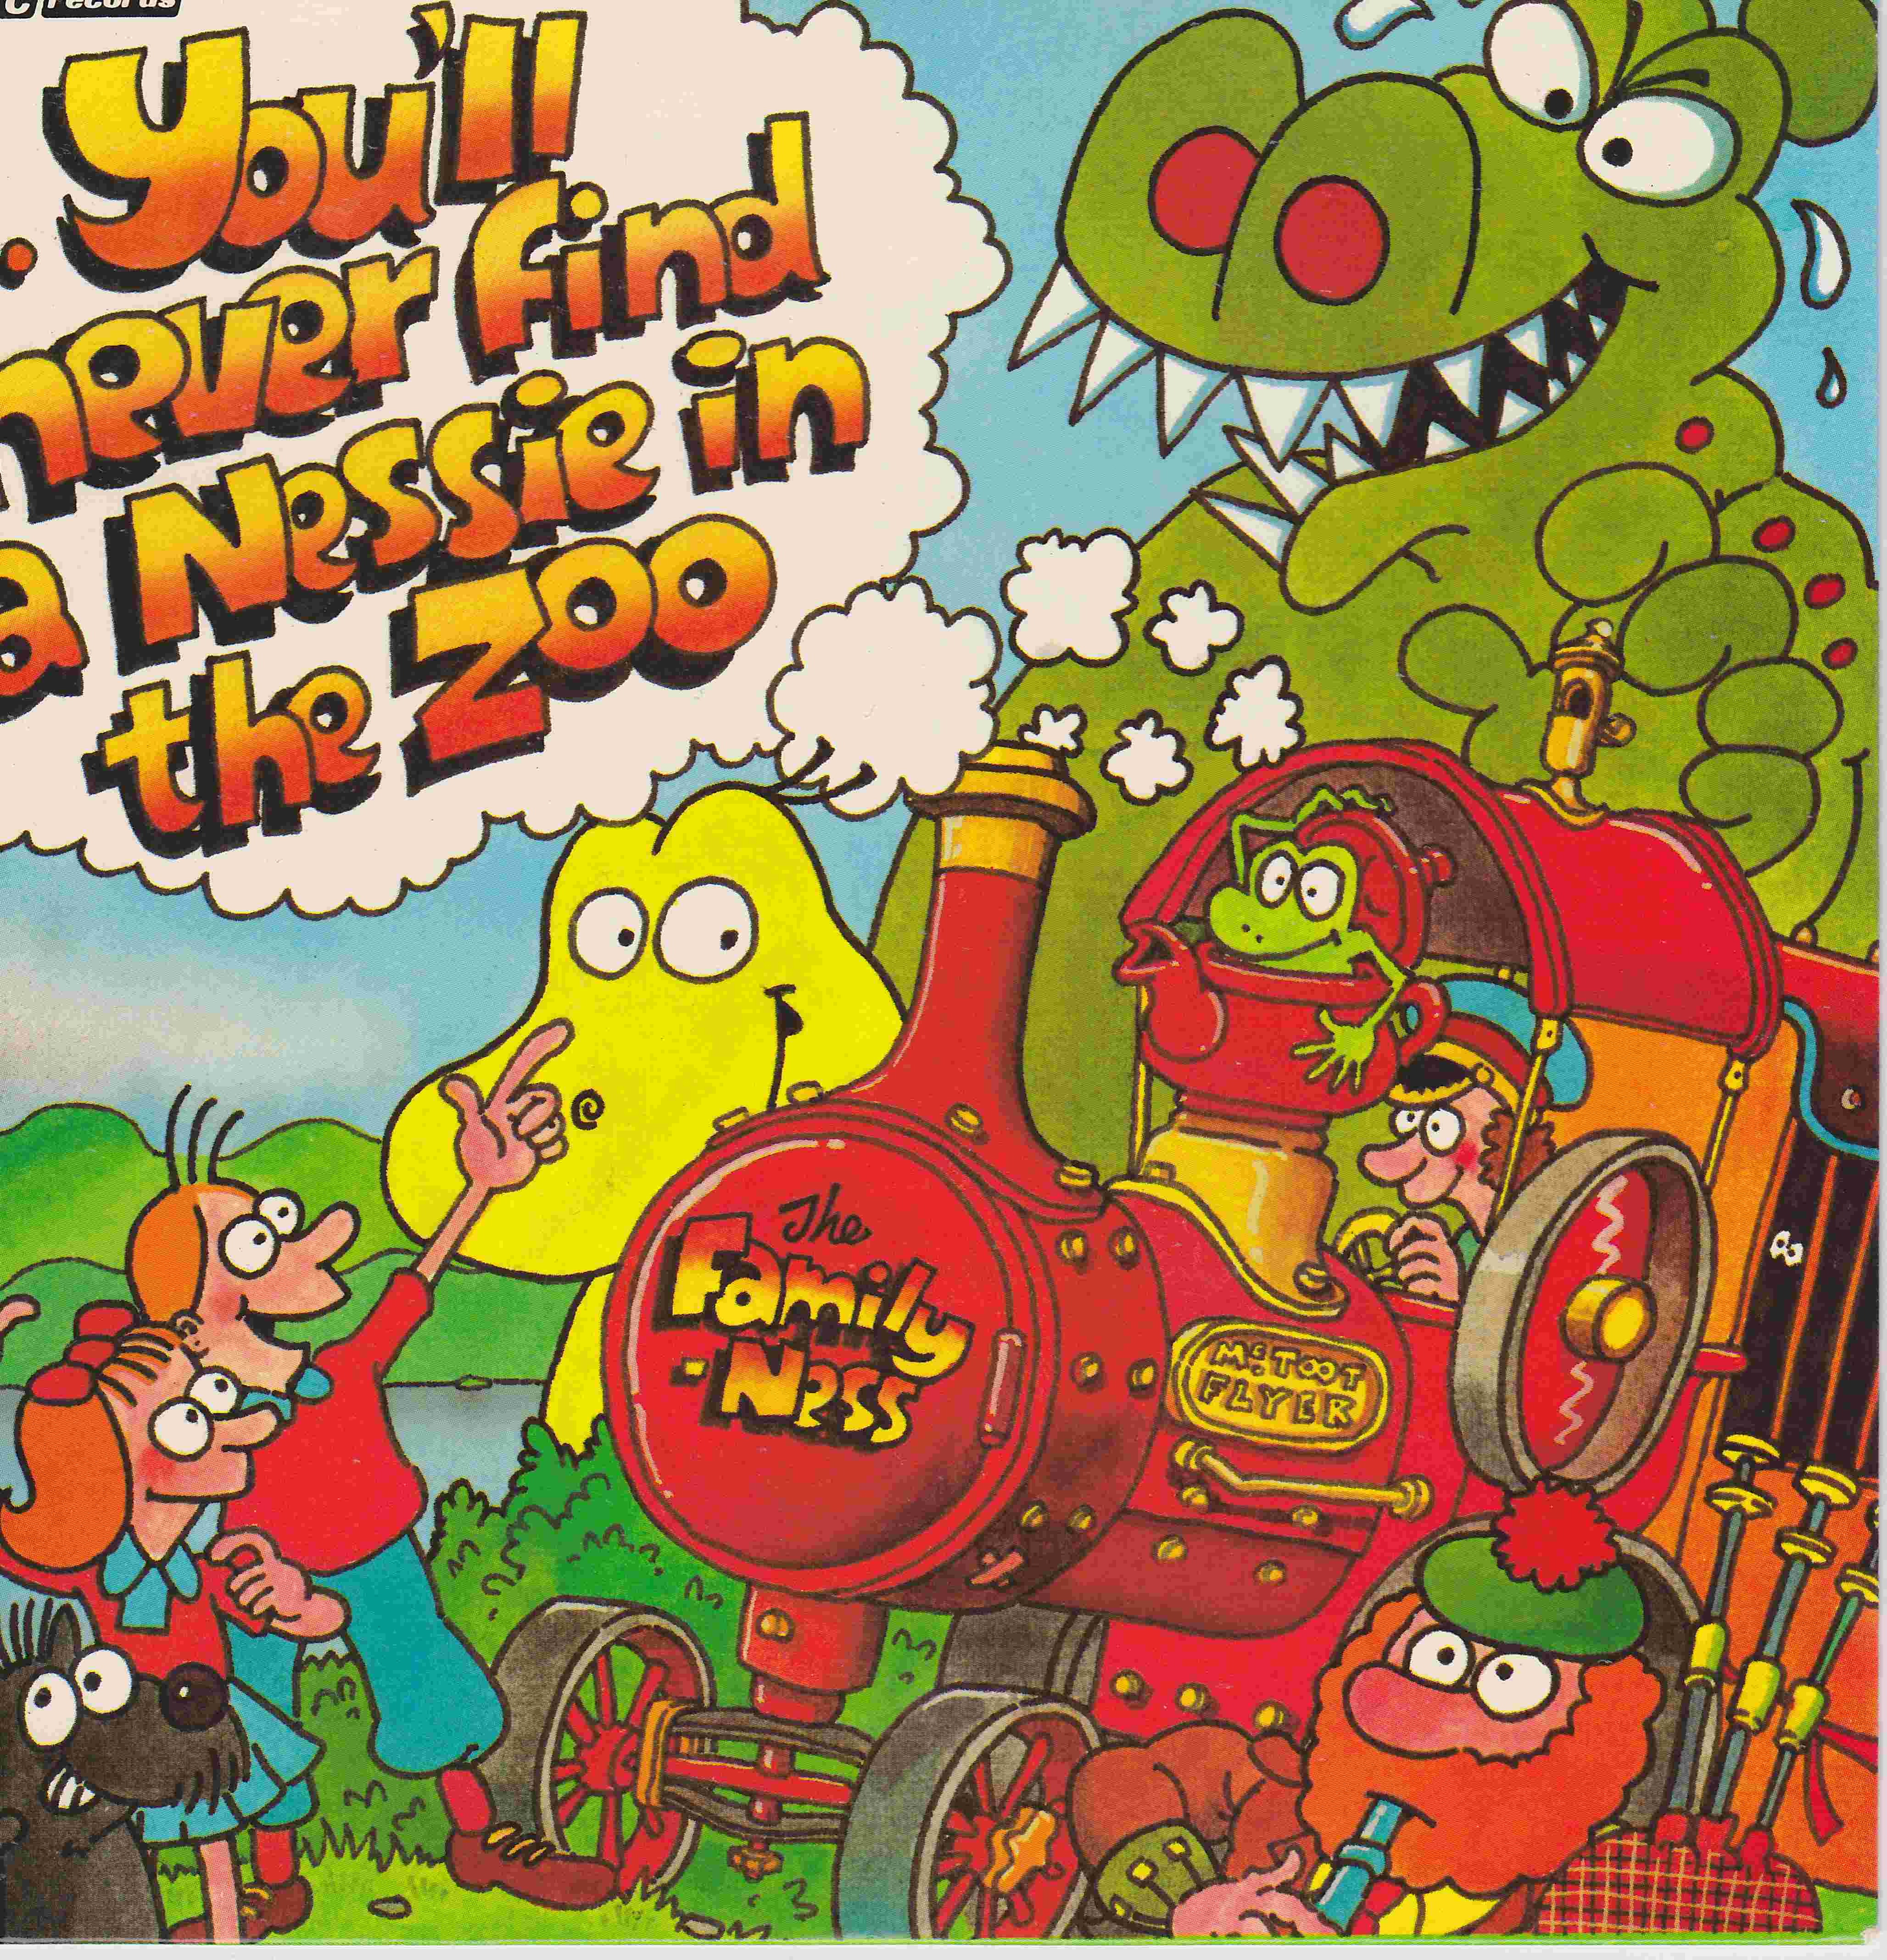 Picture of RESL 155 You'll never find a Nessie (The family ness) by artist The Family Ness from the BBC singles - Records and Tapes library